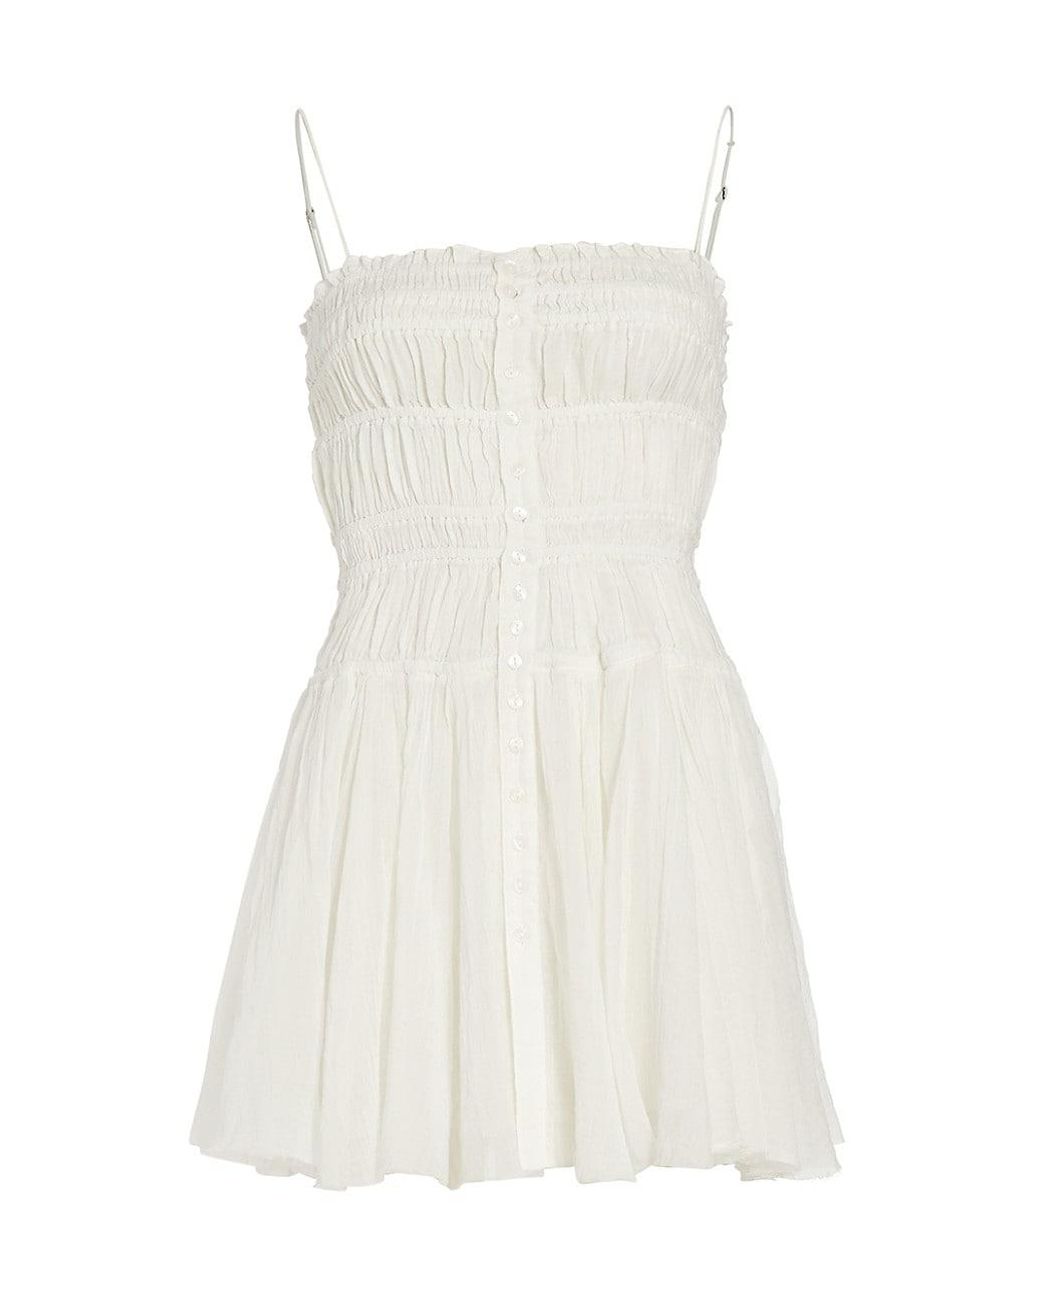 Free People Lausanne Shirred Cotton Minidress in White | Lyst